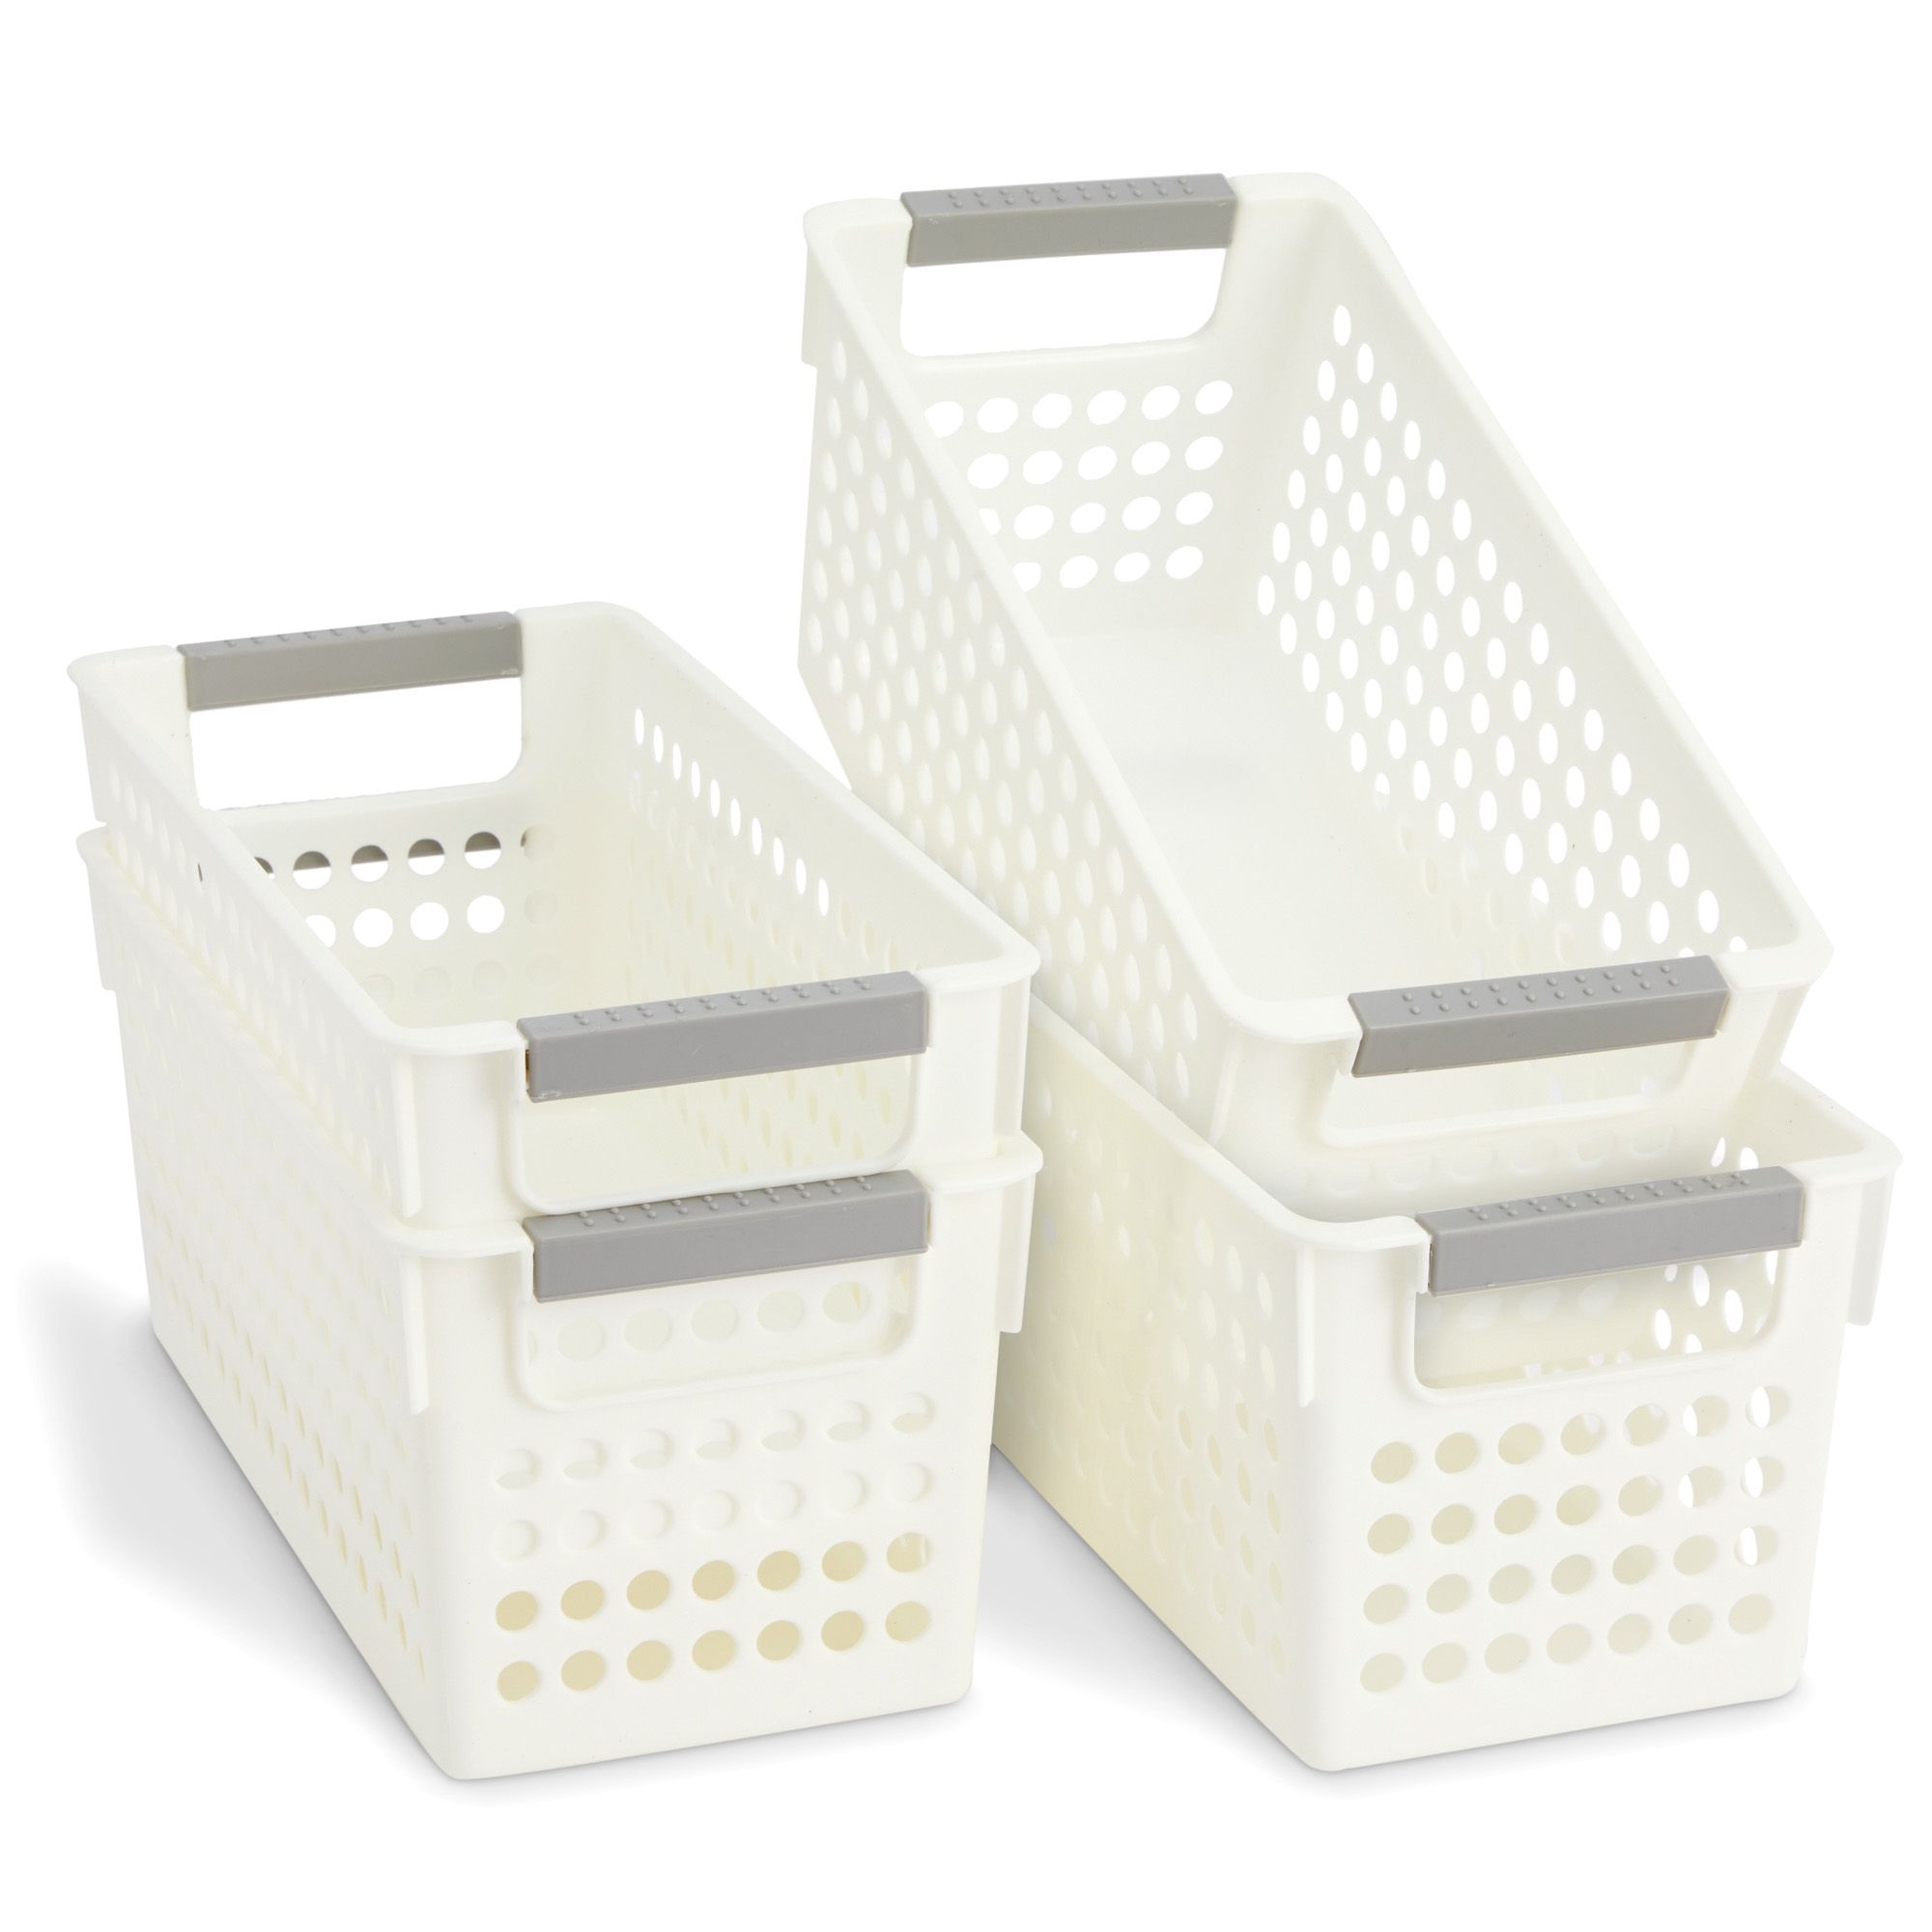 4 Pack White Plastic Baskets with Gray Handles, Narrow Storage Bins for Organizing, Kitchen and Bathroom Shelves, Small Nesting Containers (5 Inch) - image 1 of 10